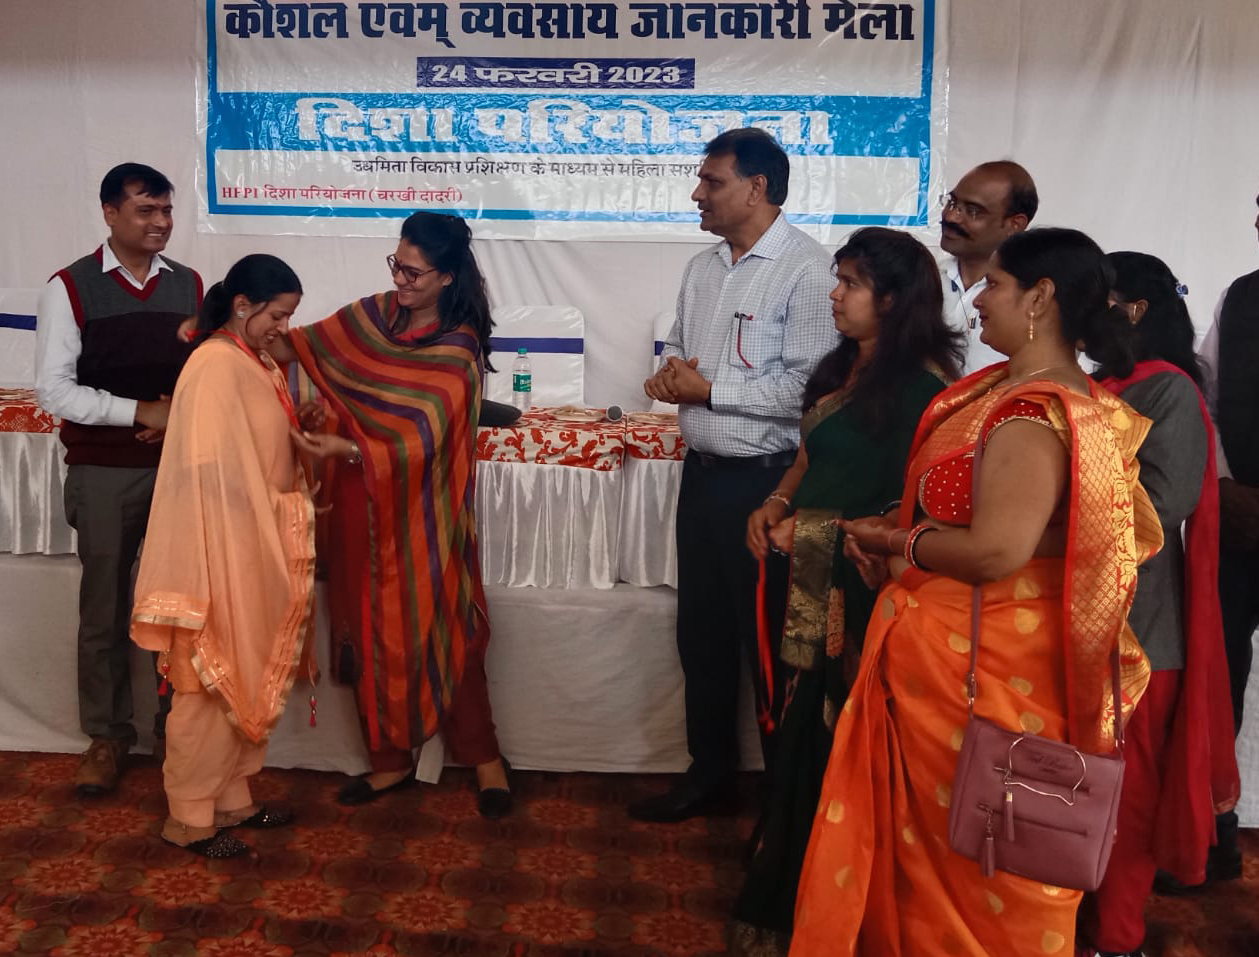 Skill and Business Information Fair organised by HPPI